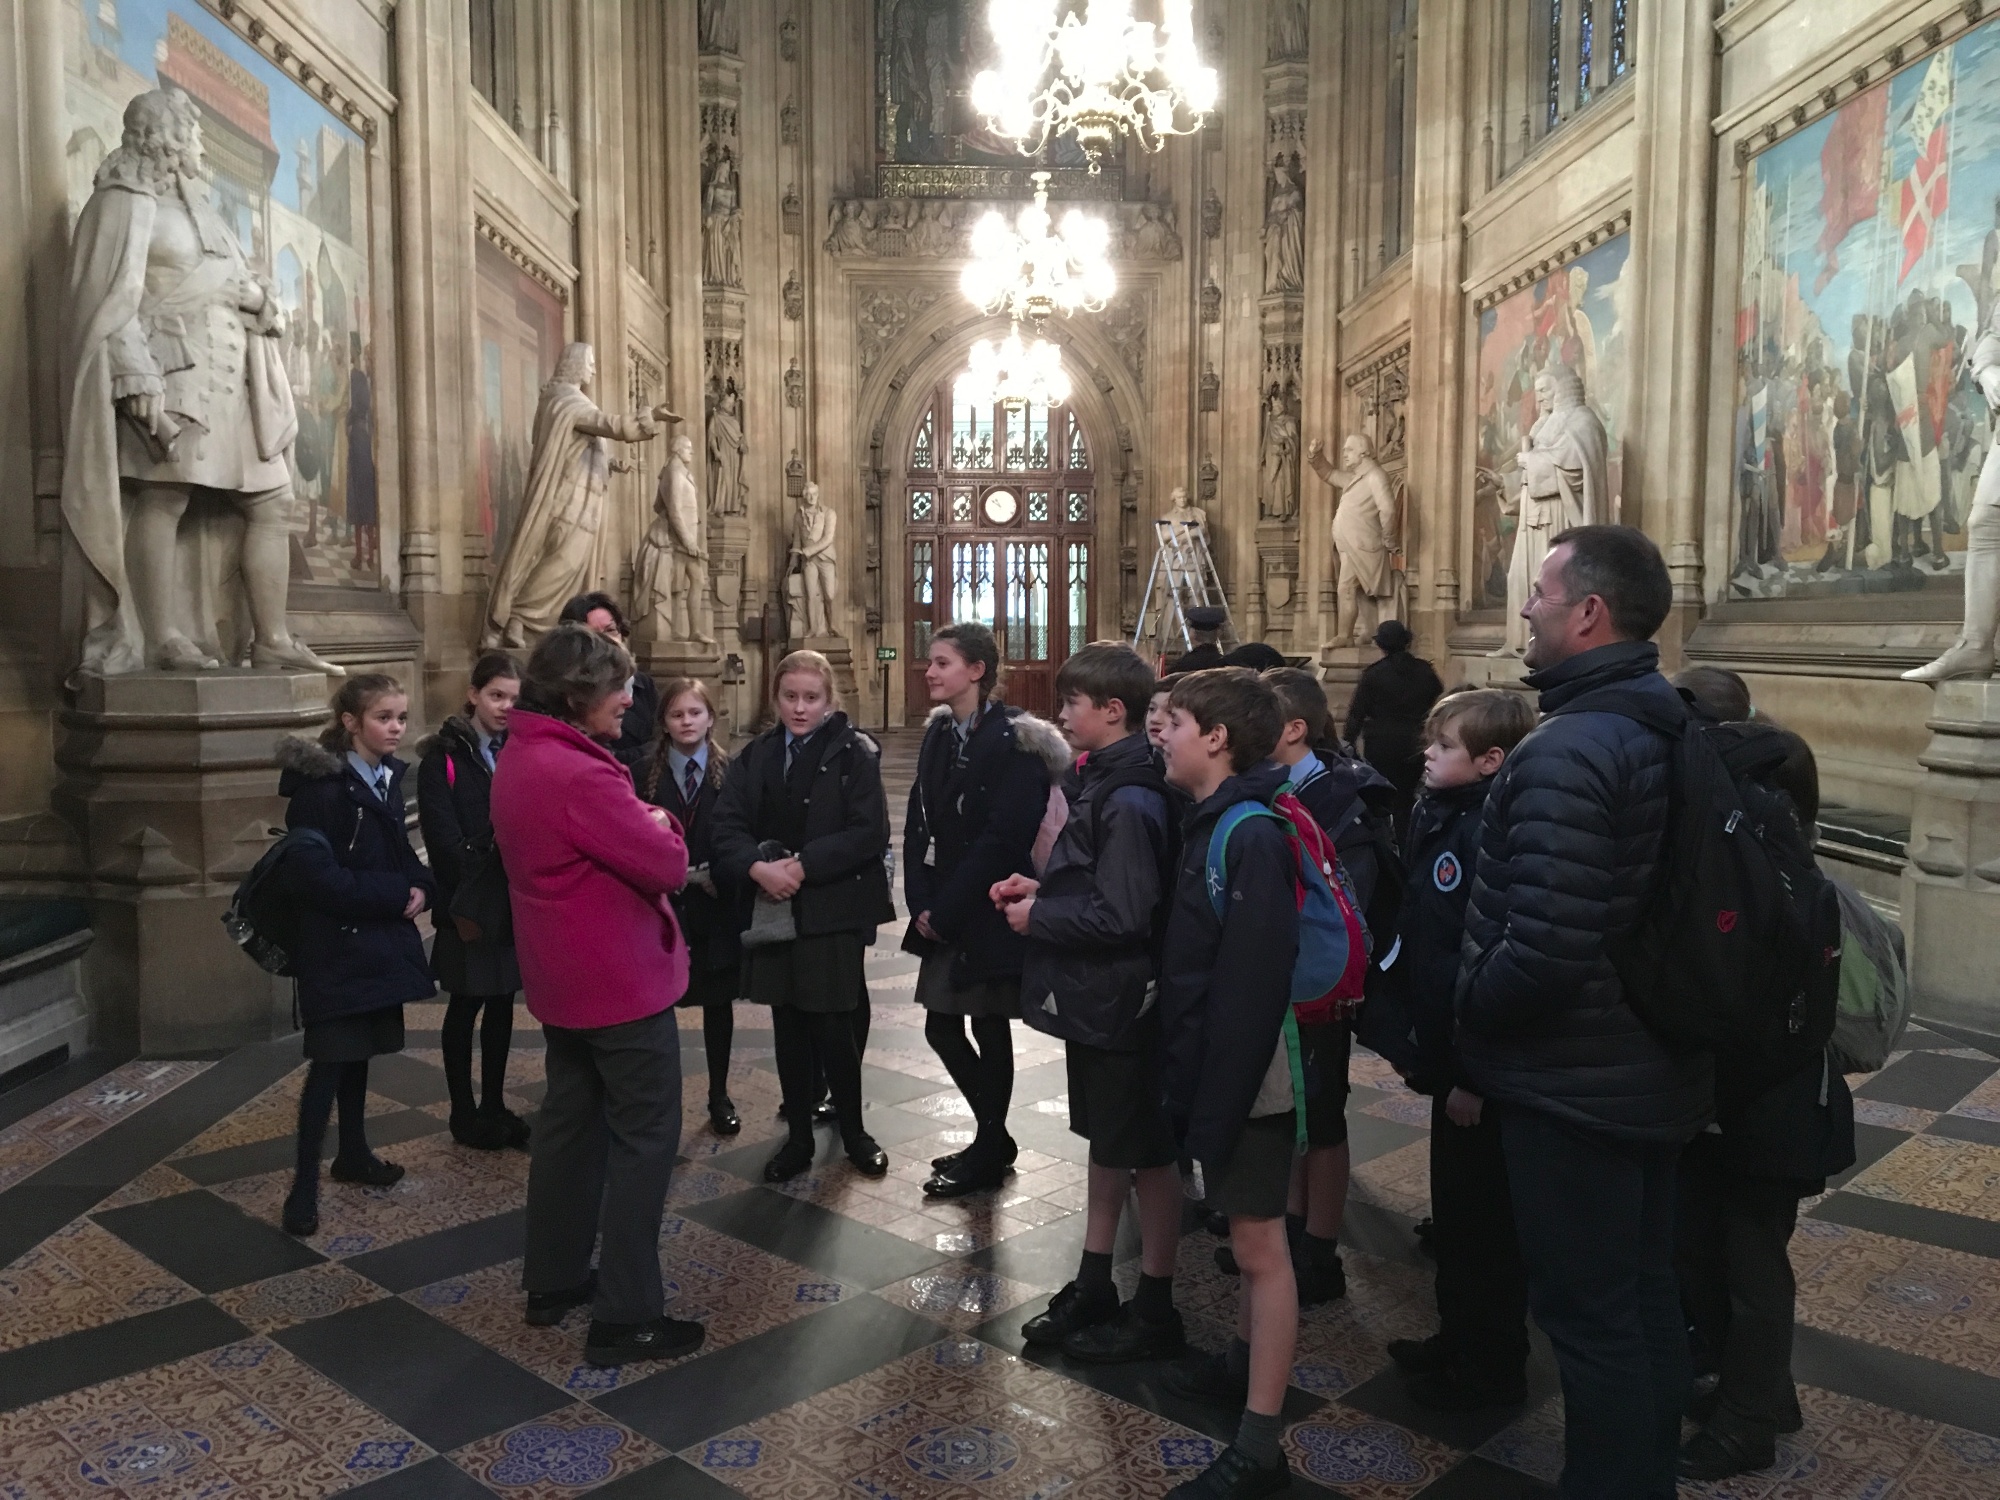 Dame Bs at Palace of Westminster 